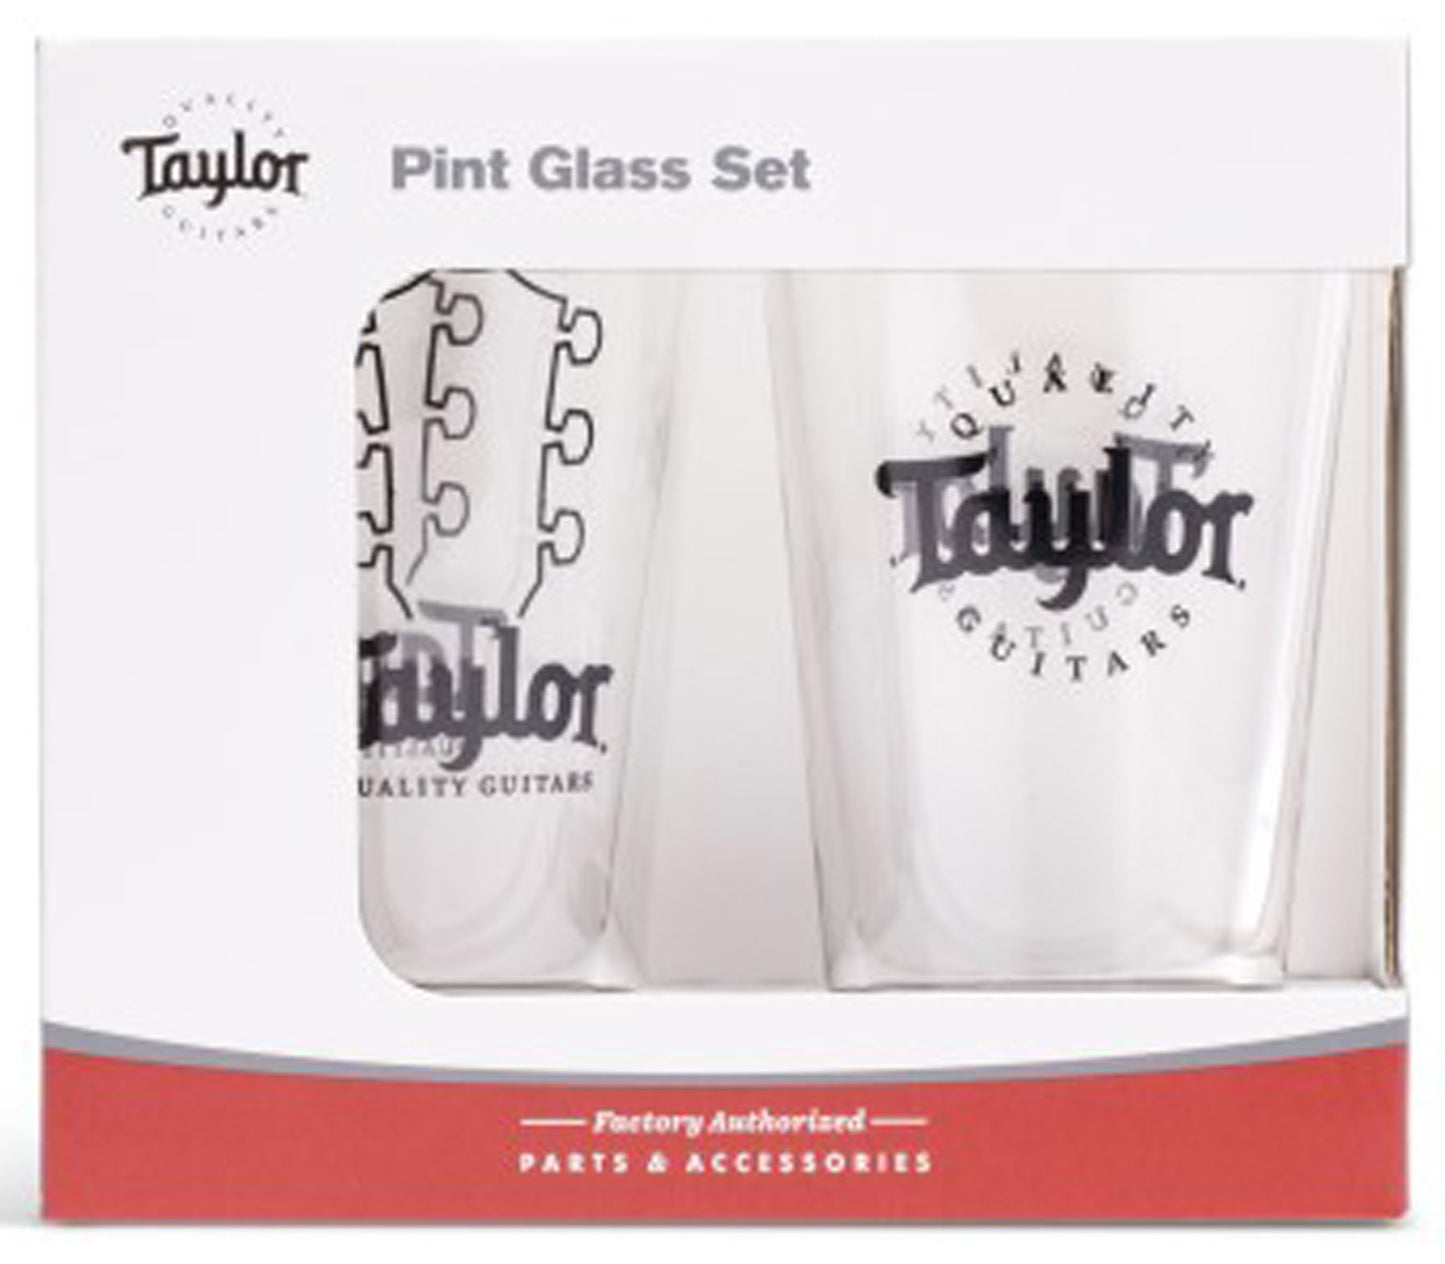 Taylor Pint Glass - Two Pack